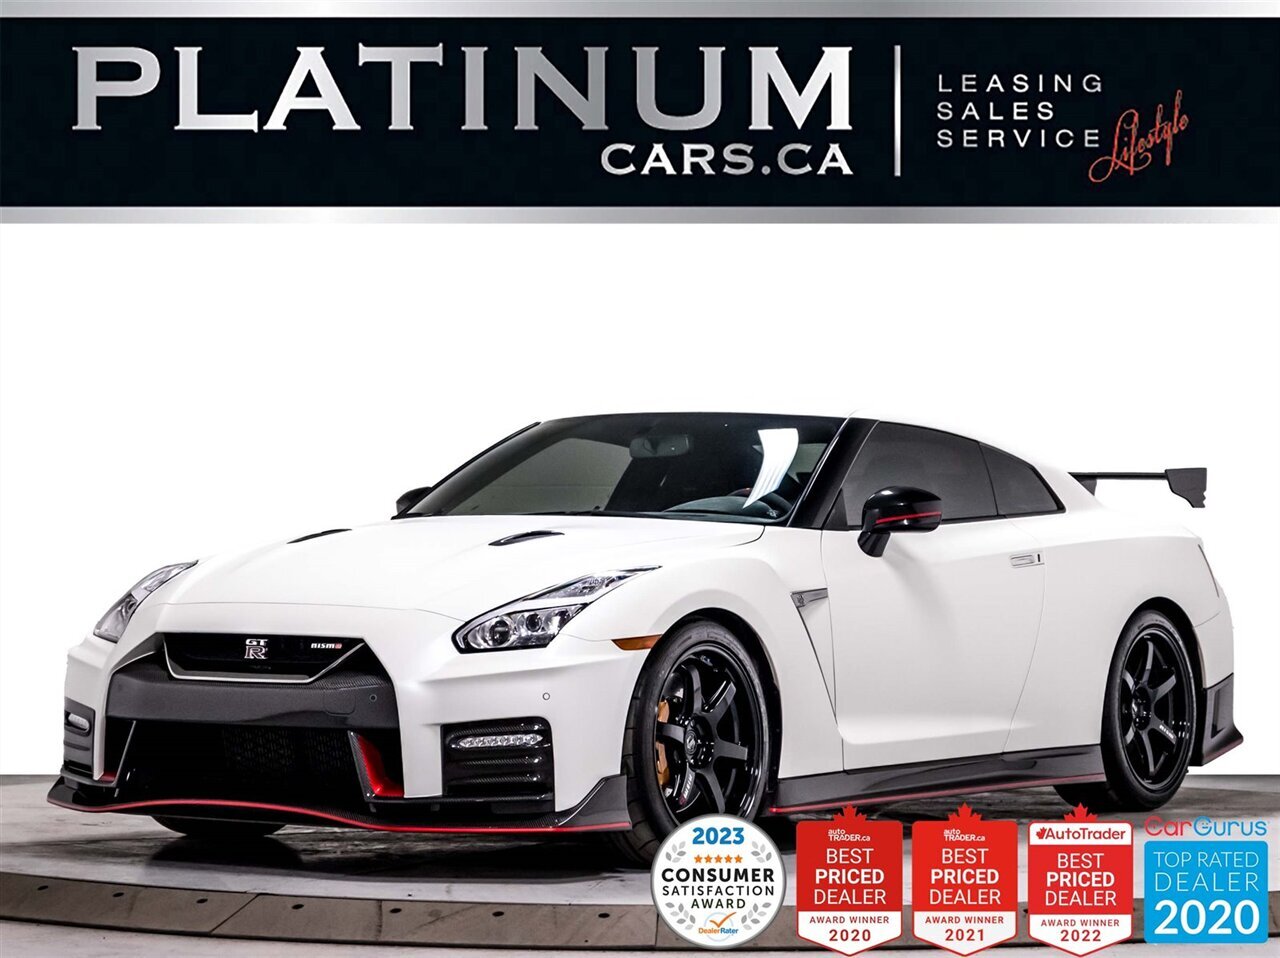 2017 Nissan GT-R NISMO, AWD, 600+HP, AMS UPGRADE, BREMBO, MATTE PPF